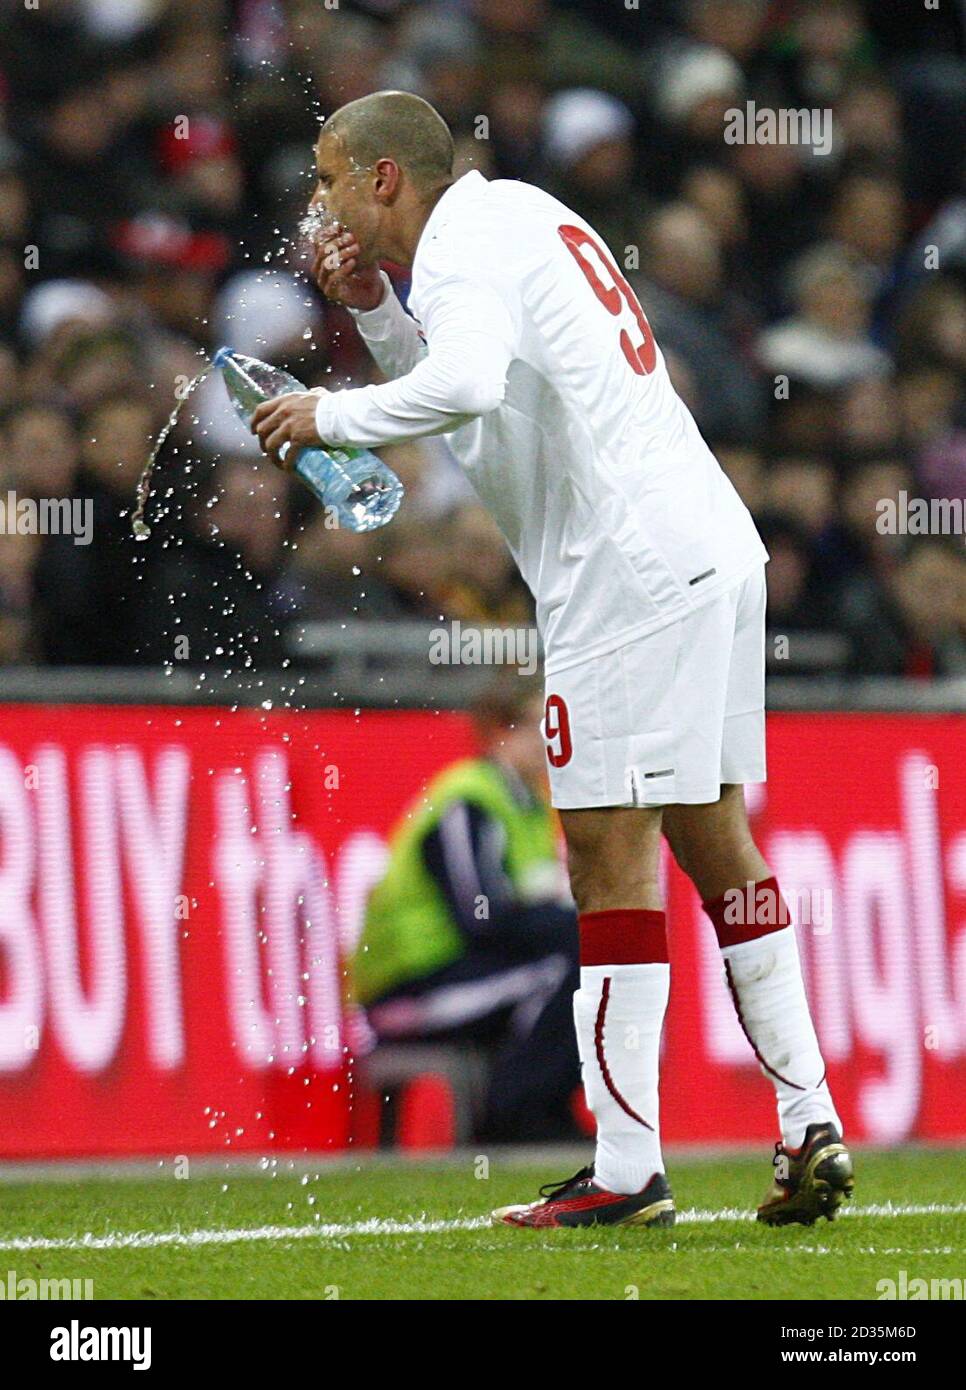 The Egypt's opening goal scorer Mohamed Zidan cools himself down with a bottle of water. Stock Photo